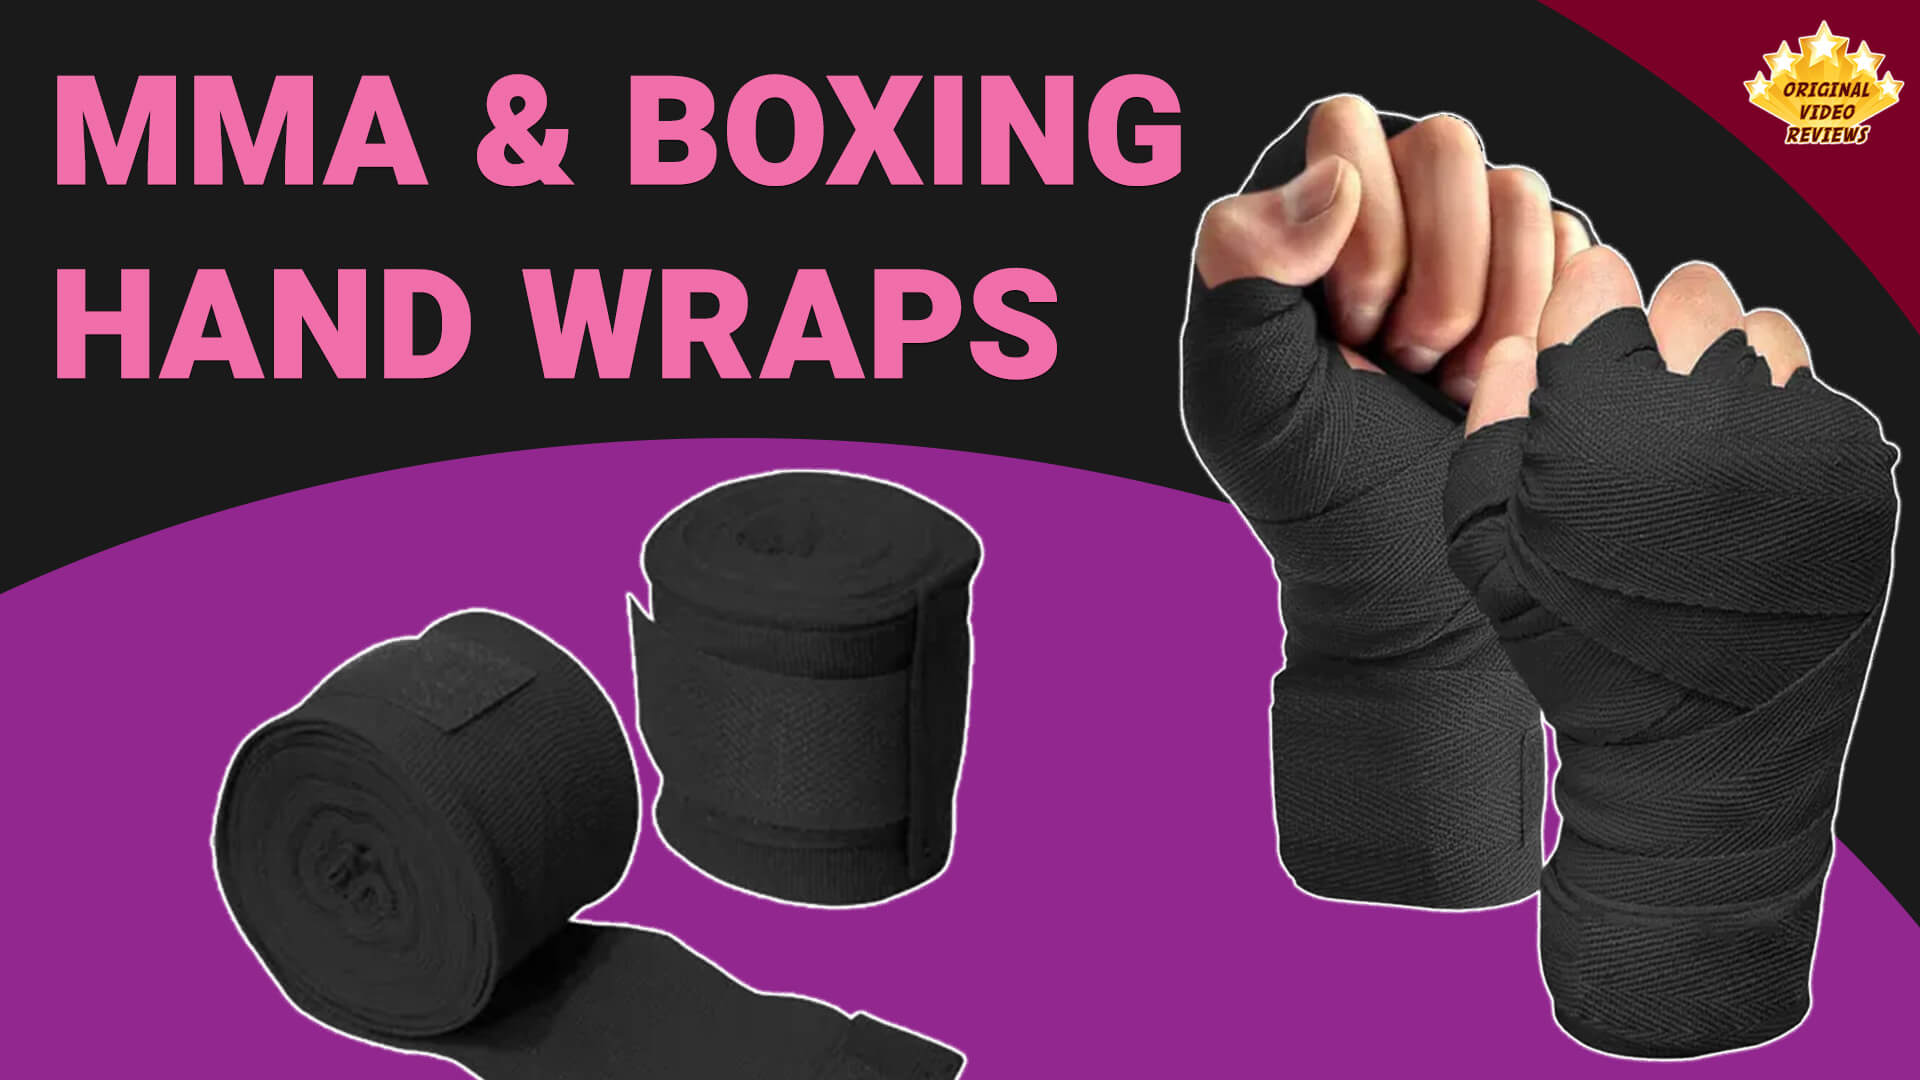 MMA & Boxing Hand Wraps